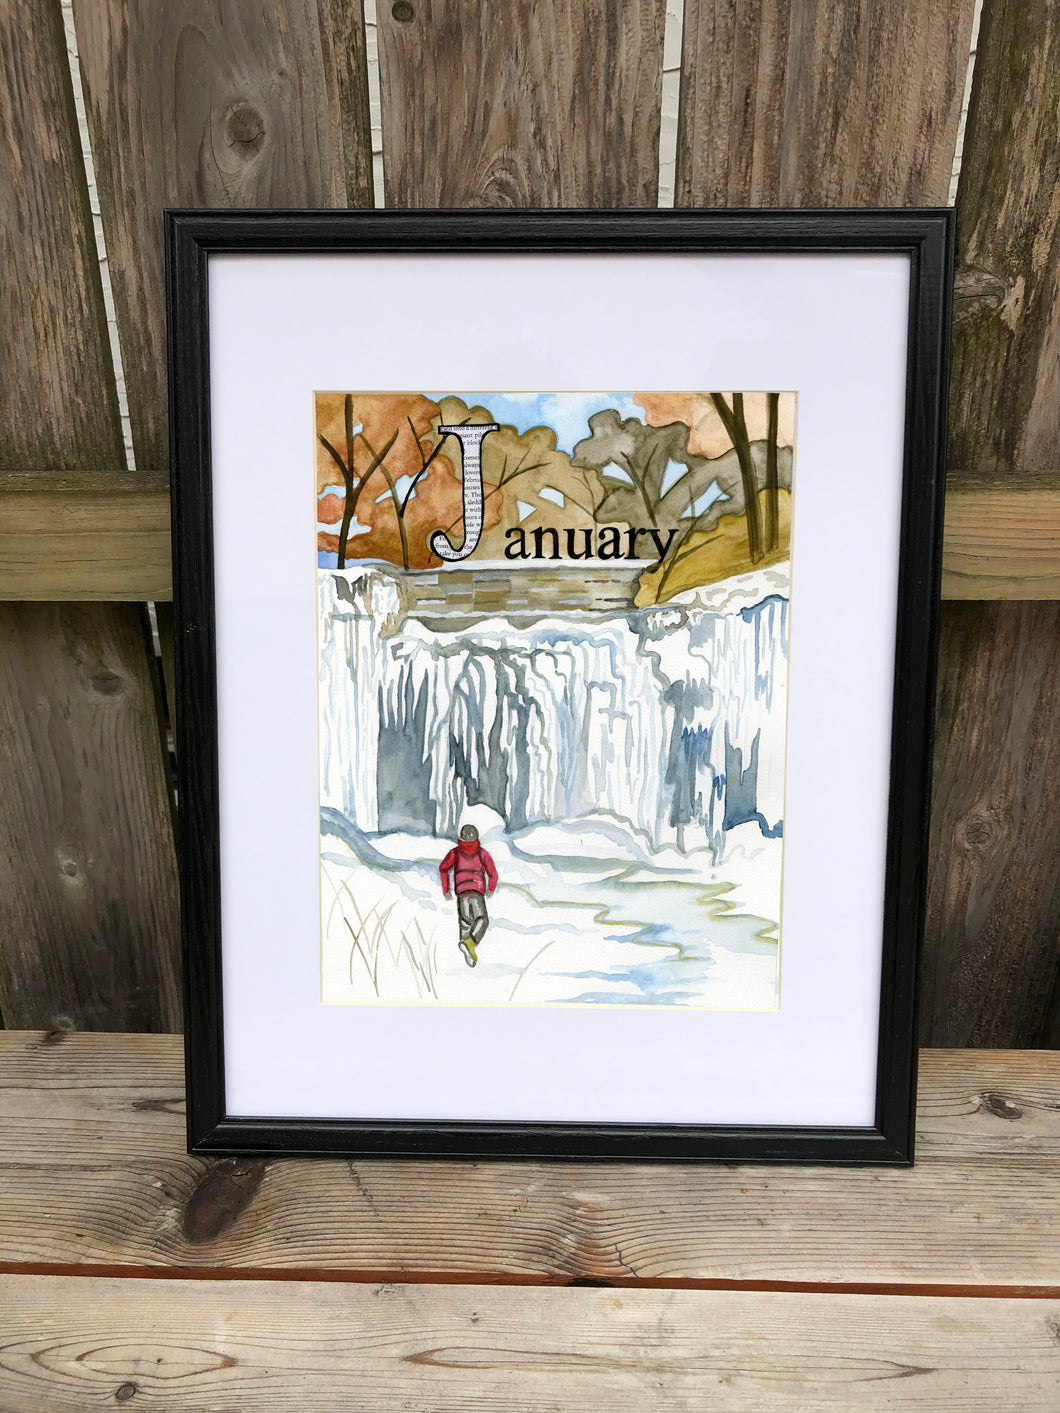 J is for January - Original Framed Painting